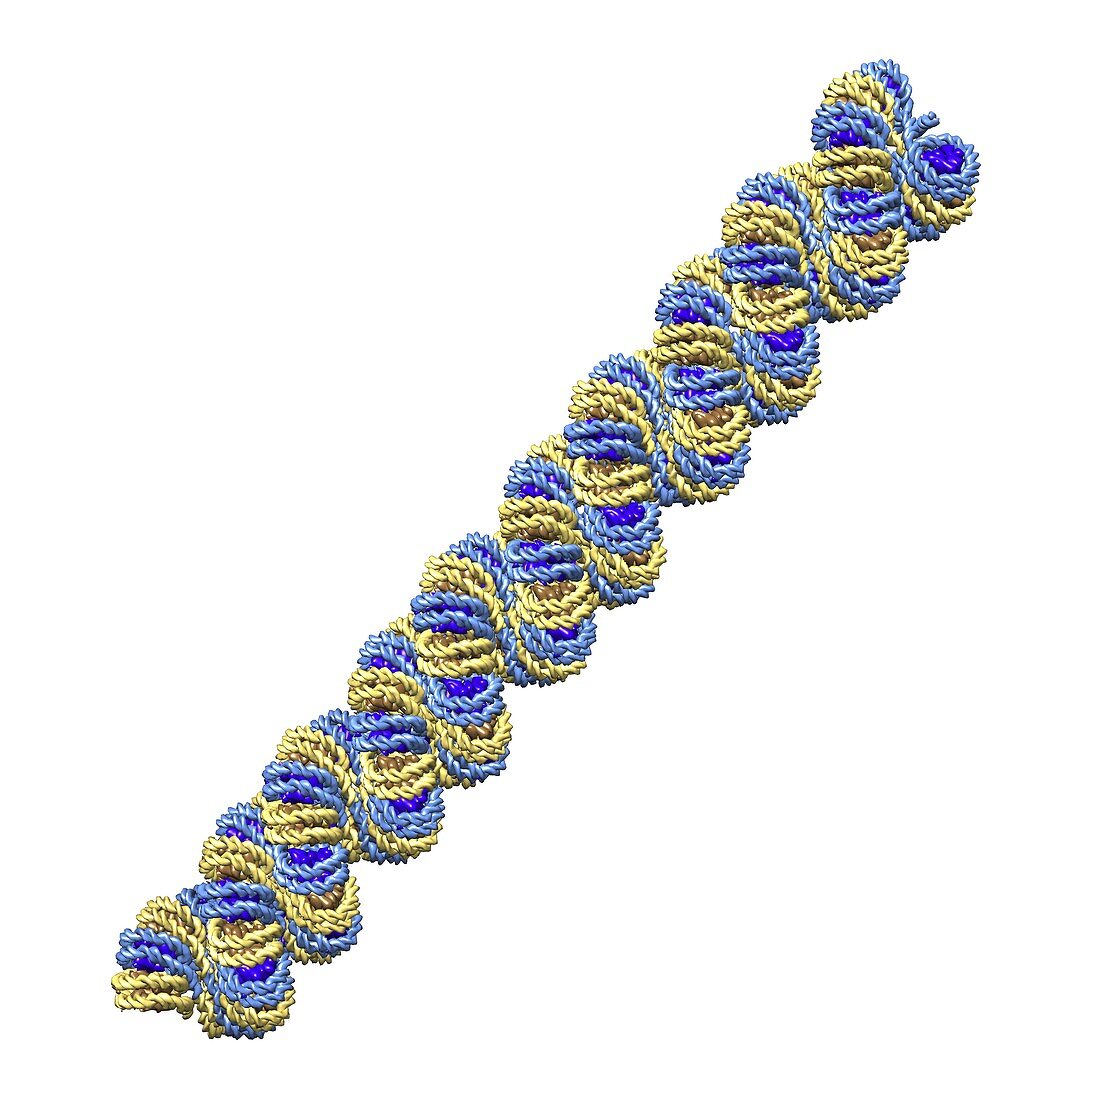 Chromatin fibre and DNA packaging